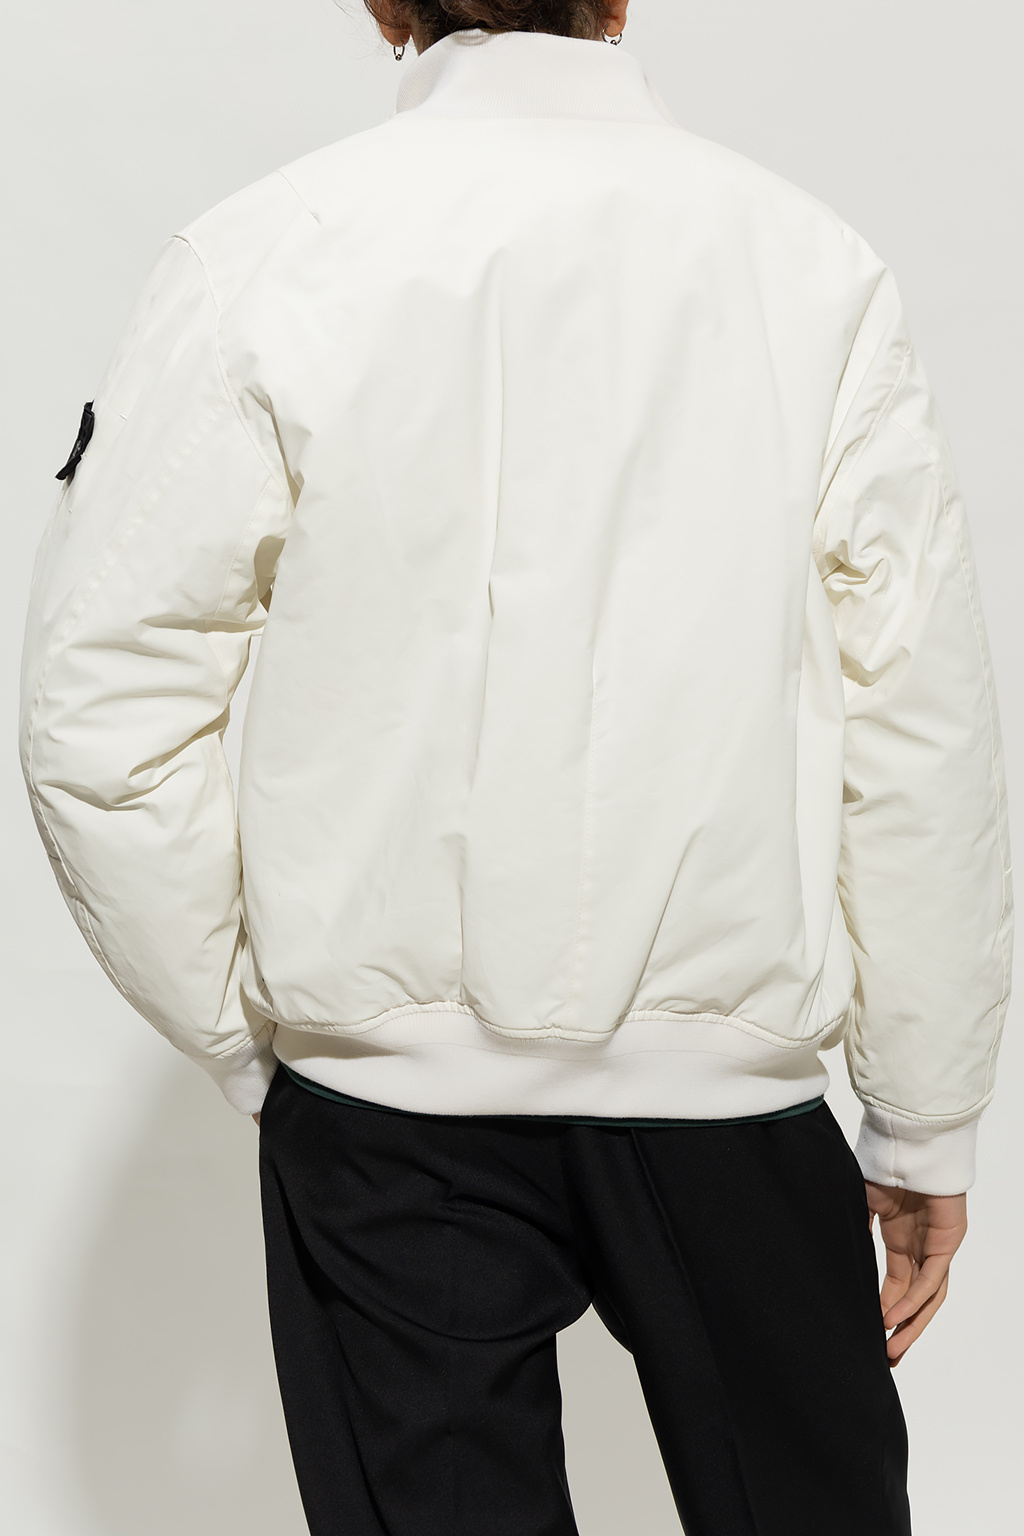 Stone Island escuro embroidered hoodie